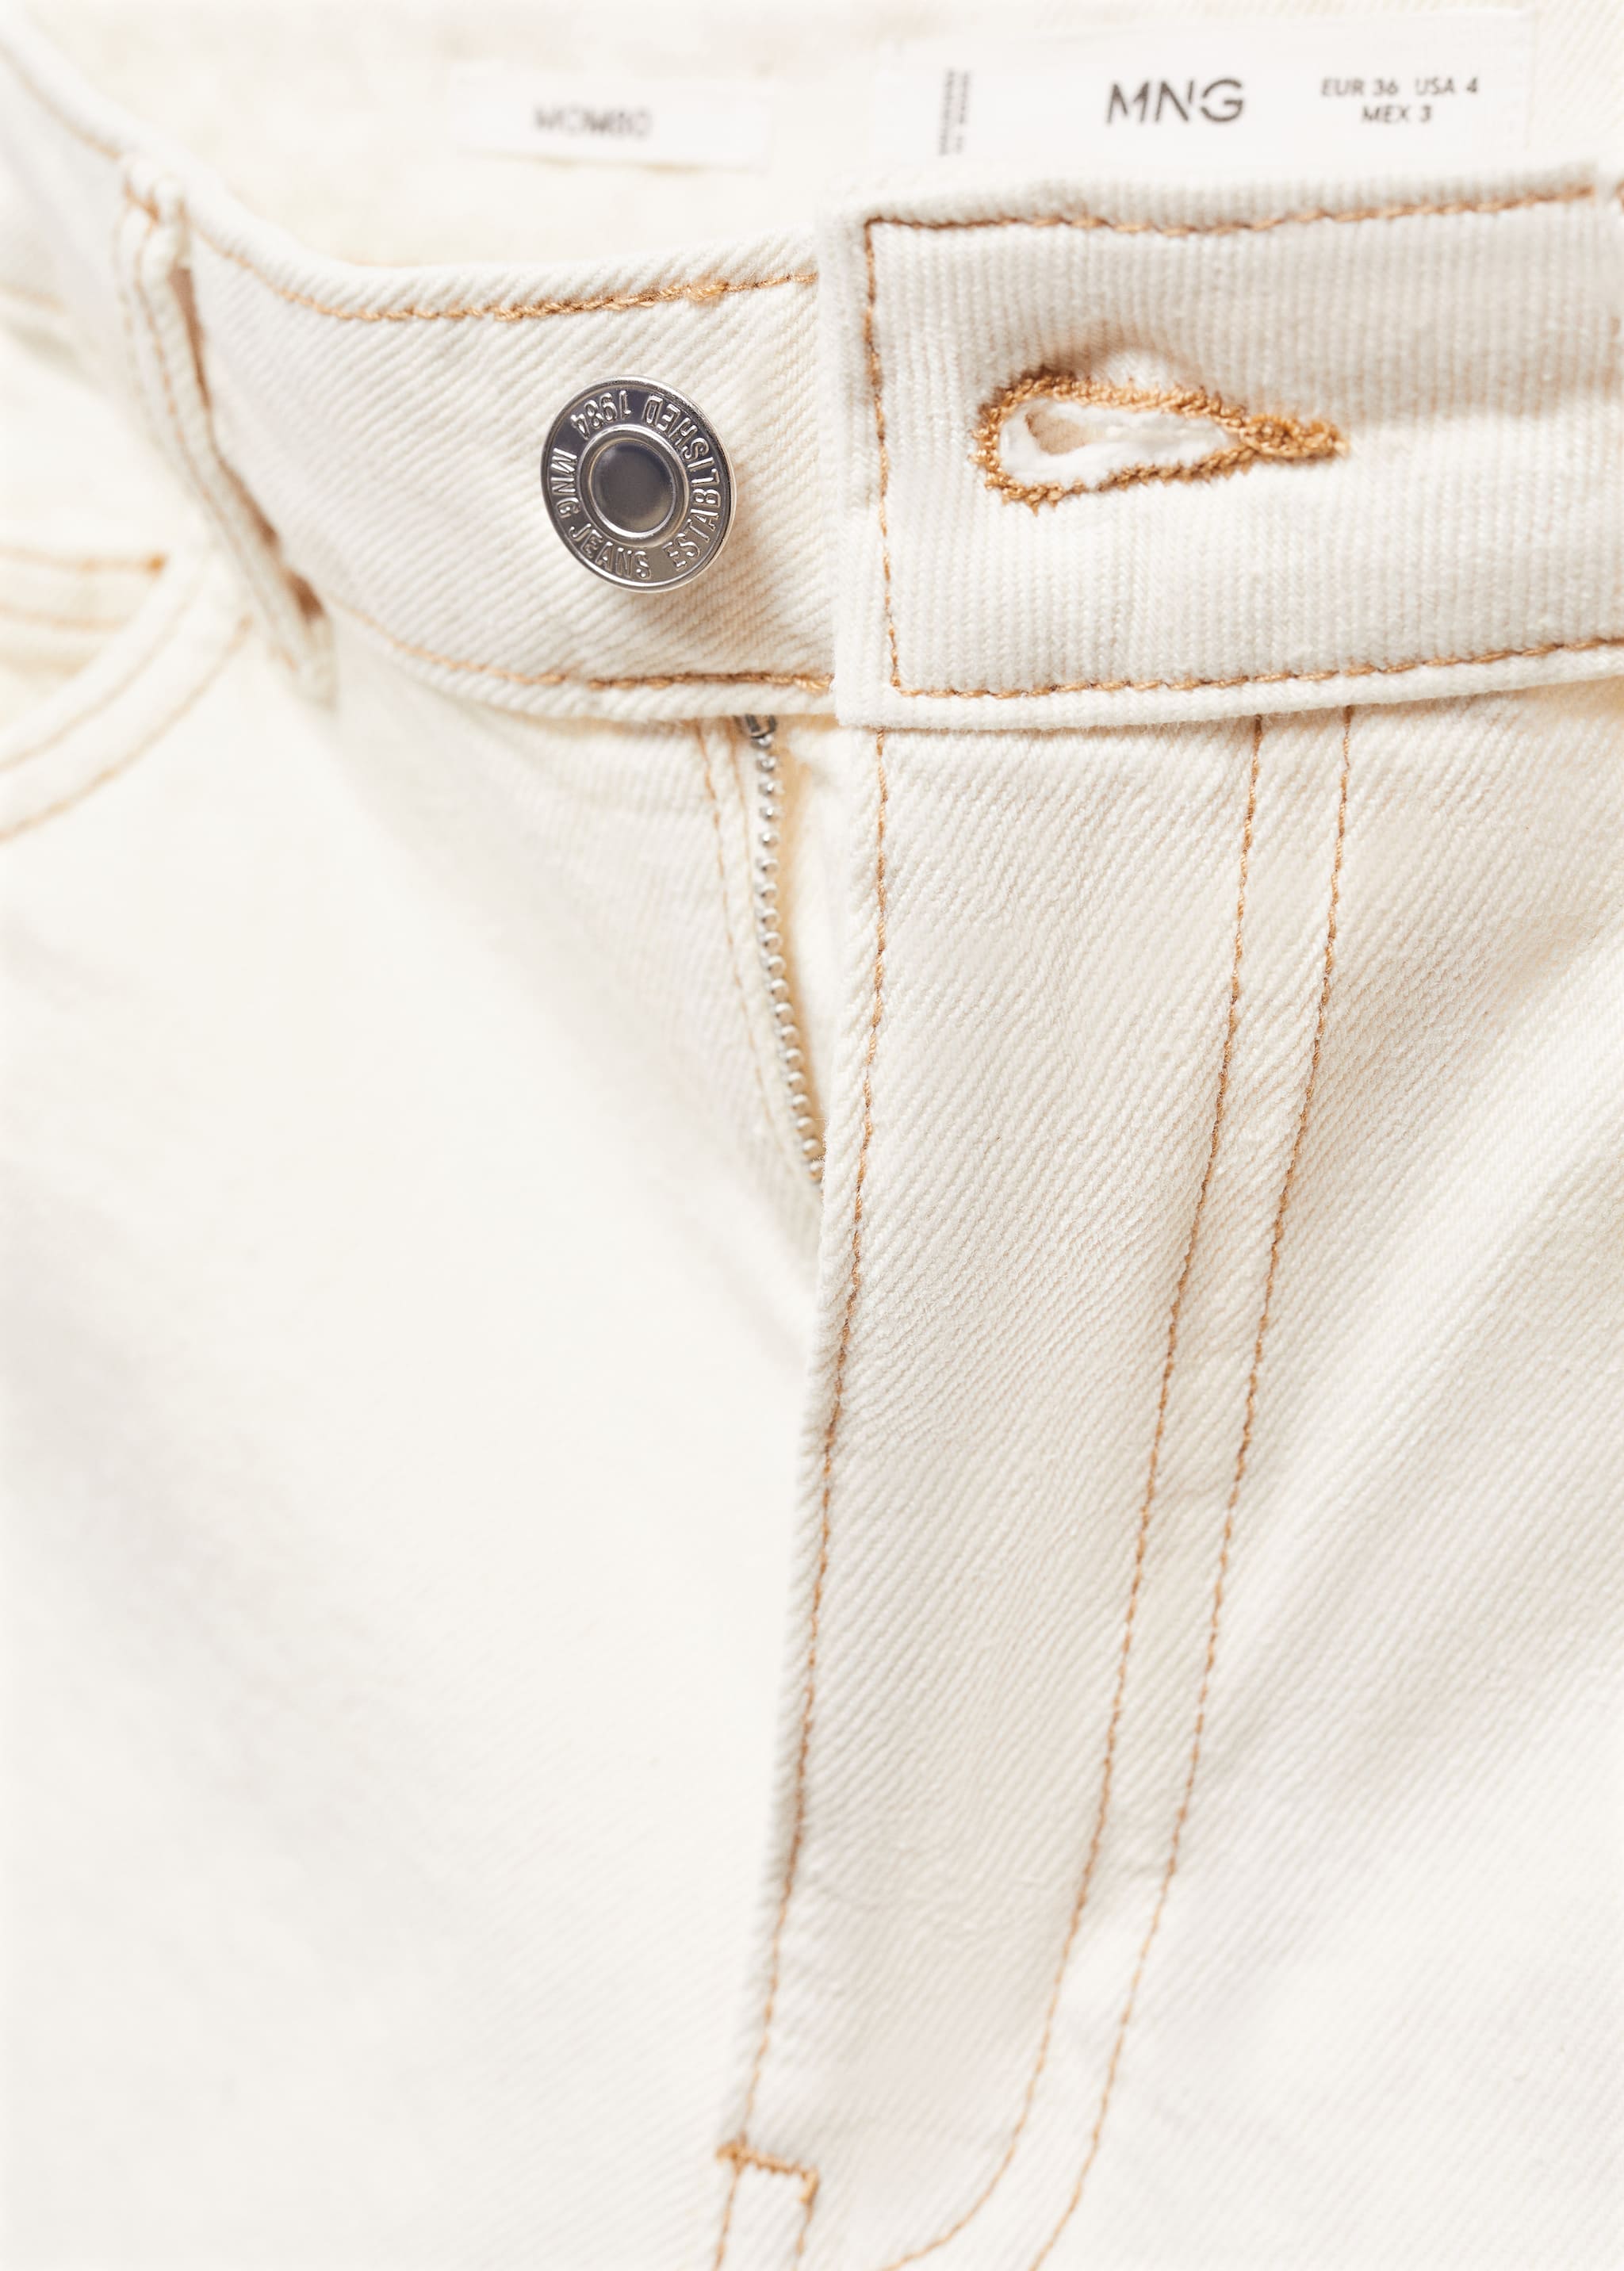 High-rise denim shorts - Details of the article 8